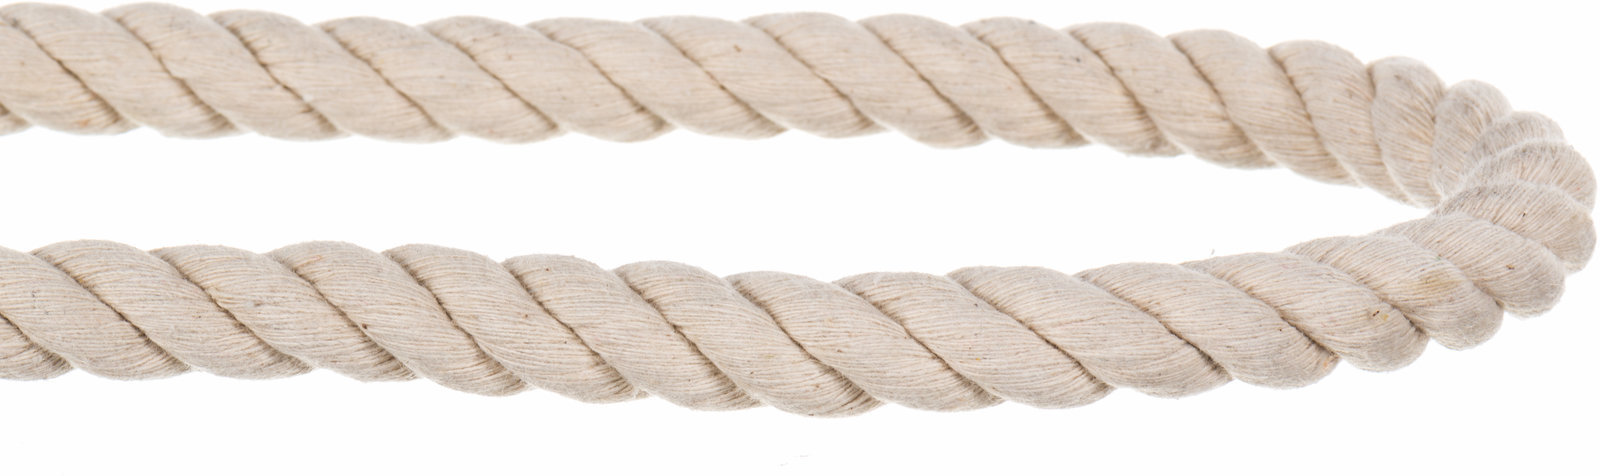 Solid Braided Cotton Clothesline